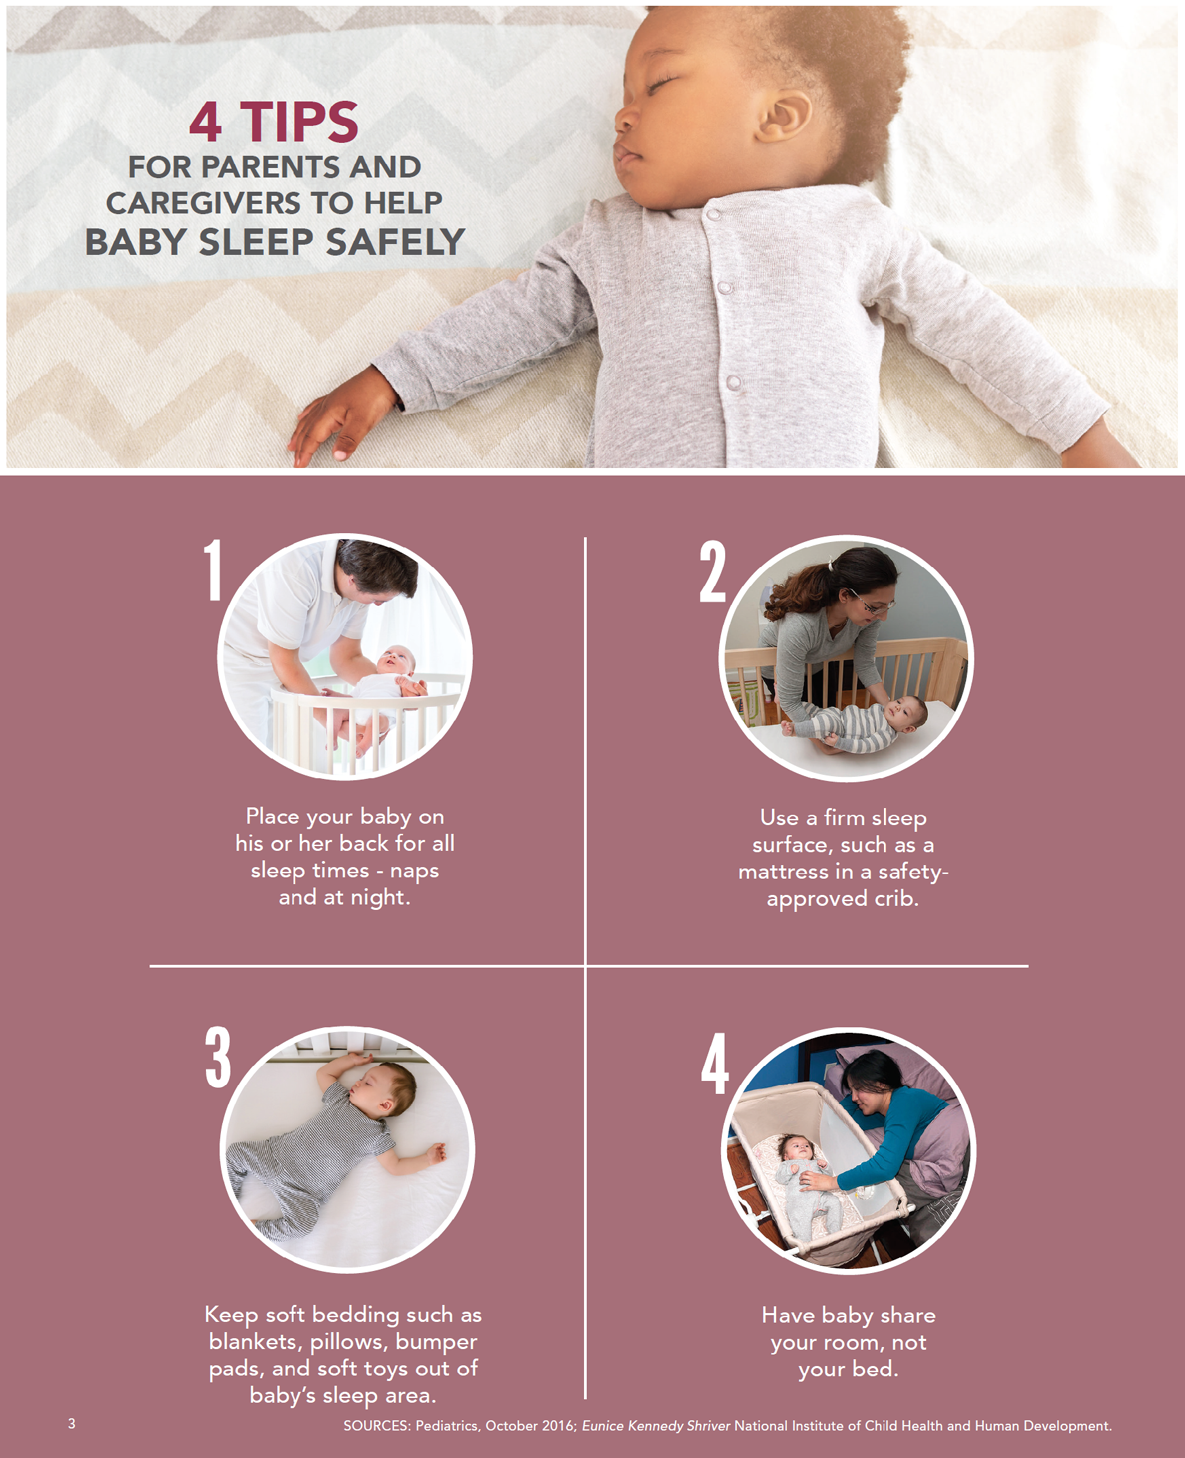 4 tips for parents and caregivers to help baby sleep safety